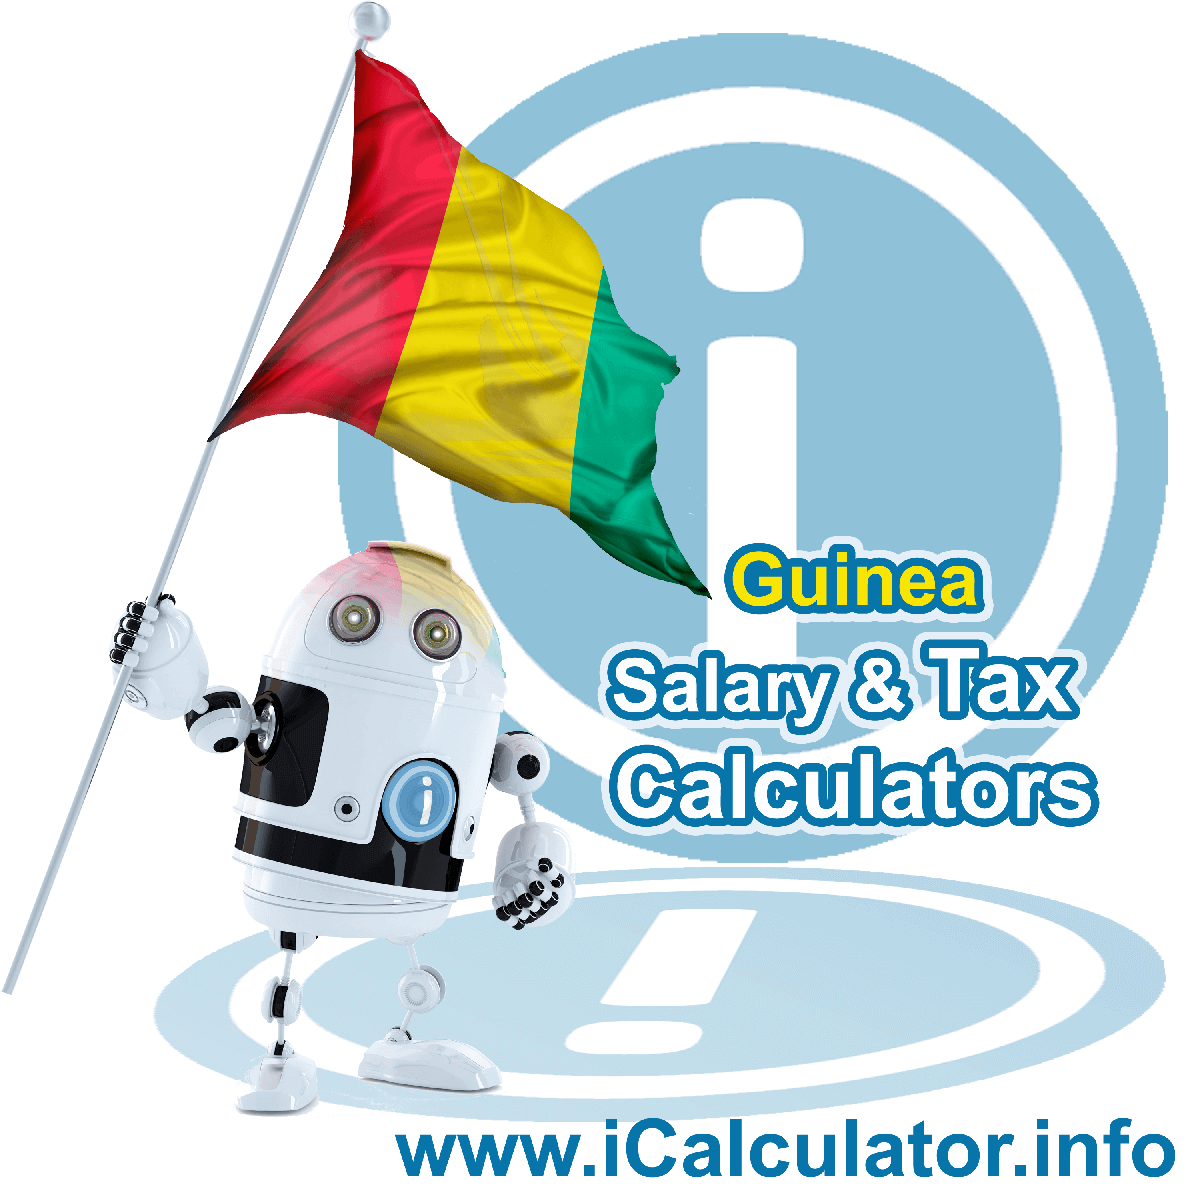 Guinea Tax Calculator. This image shows the Guinea flag and information relating to the tax formula for the Guinea Salary Calculator